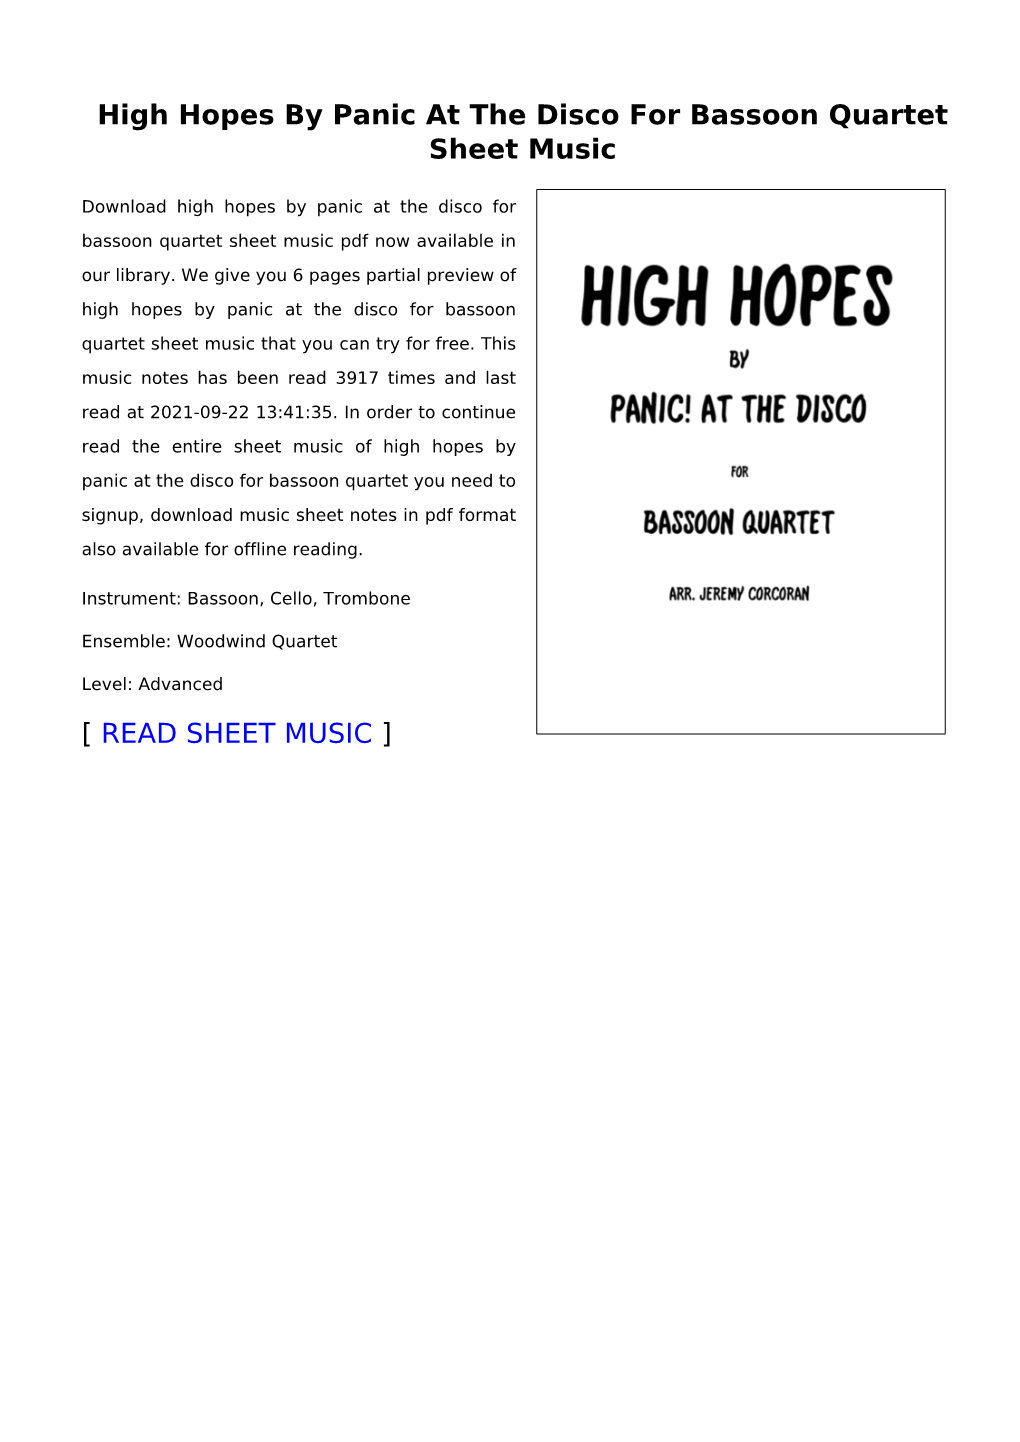 High Hopes by Panic at the Disco for Bassoon Quartet Sheet Music